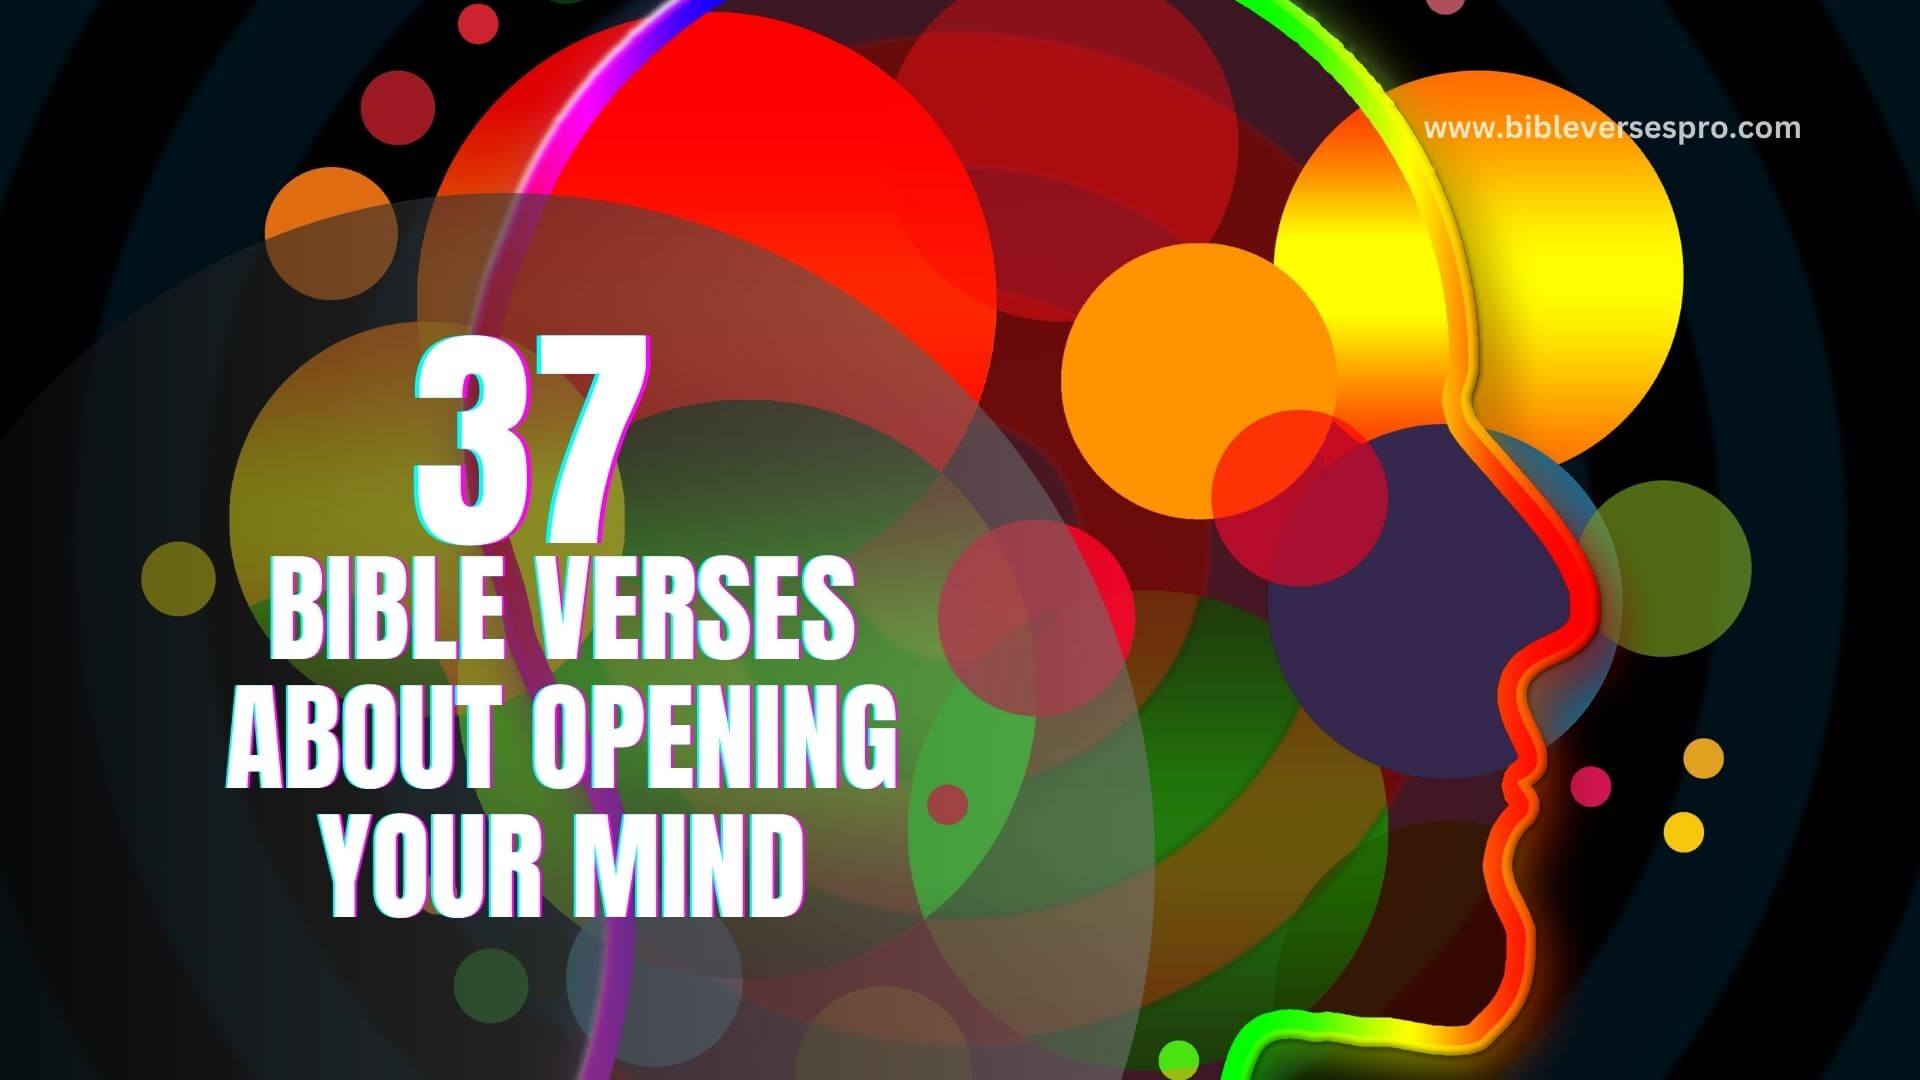 BIBLE VERSES ABOUT OPENING YOUR MIND (1)